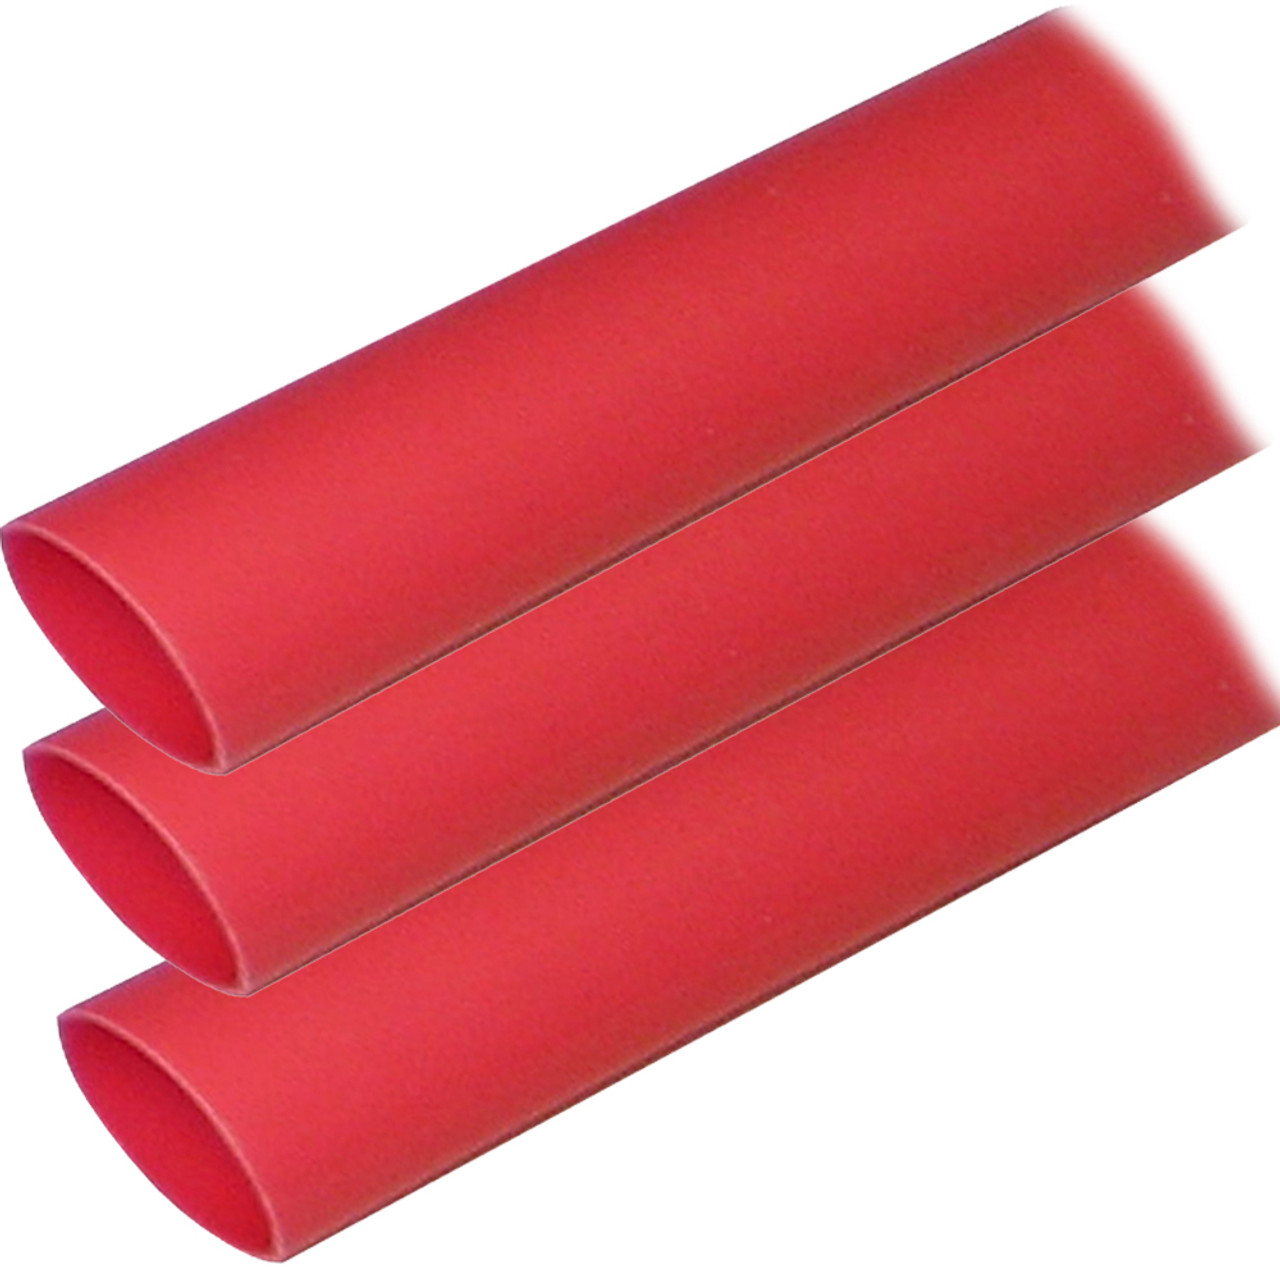 Ancor Adhesive Lined Heat Shrink Tubing (ALT) - 1" x 12" - 3-Pack - Red [307624]